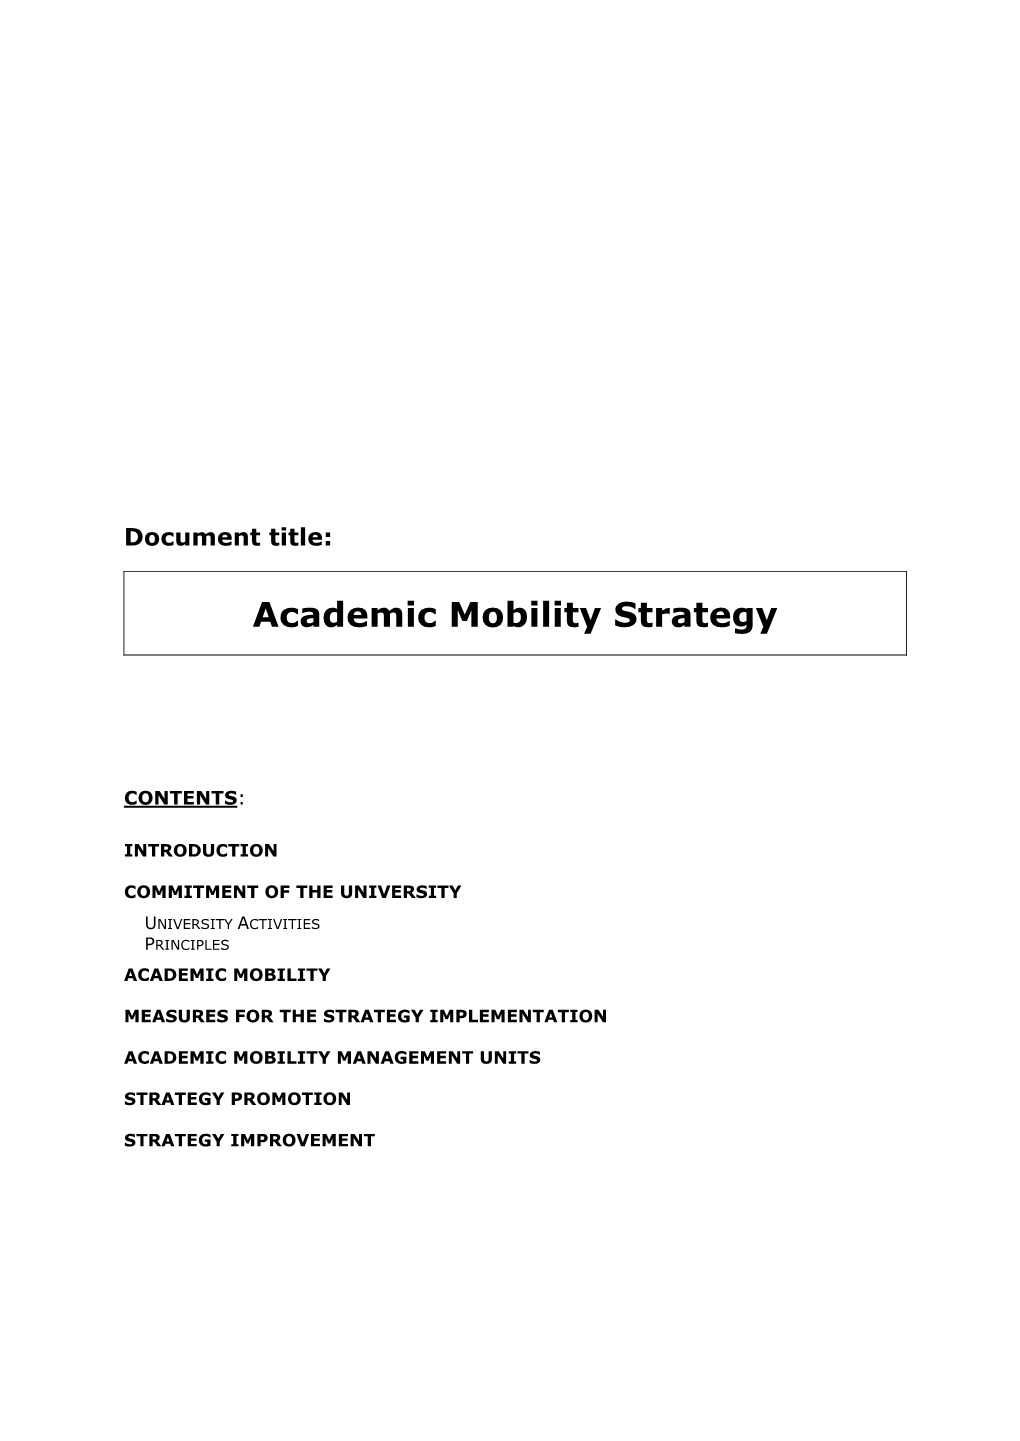 Academic Mobility Strategy